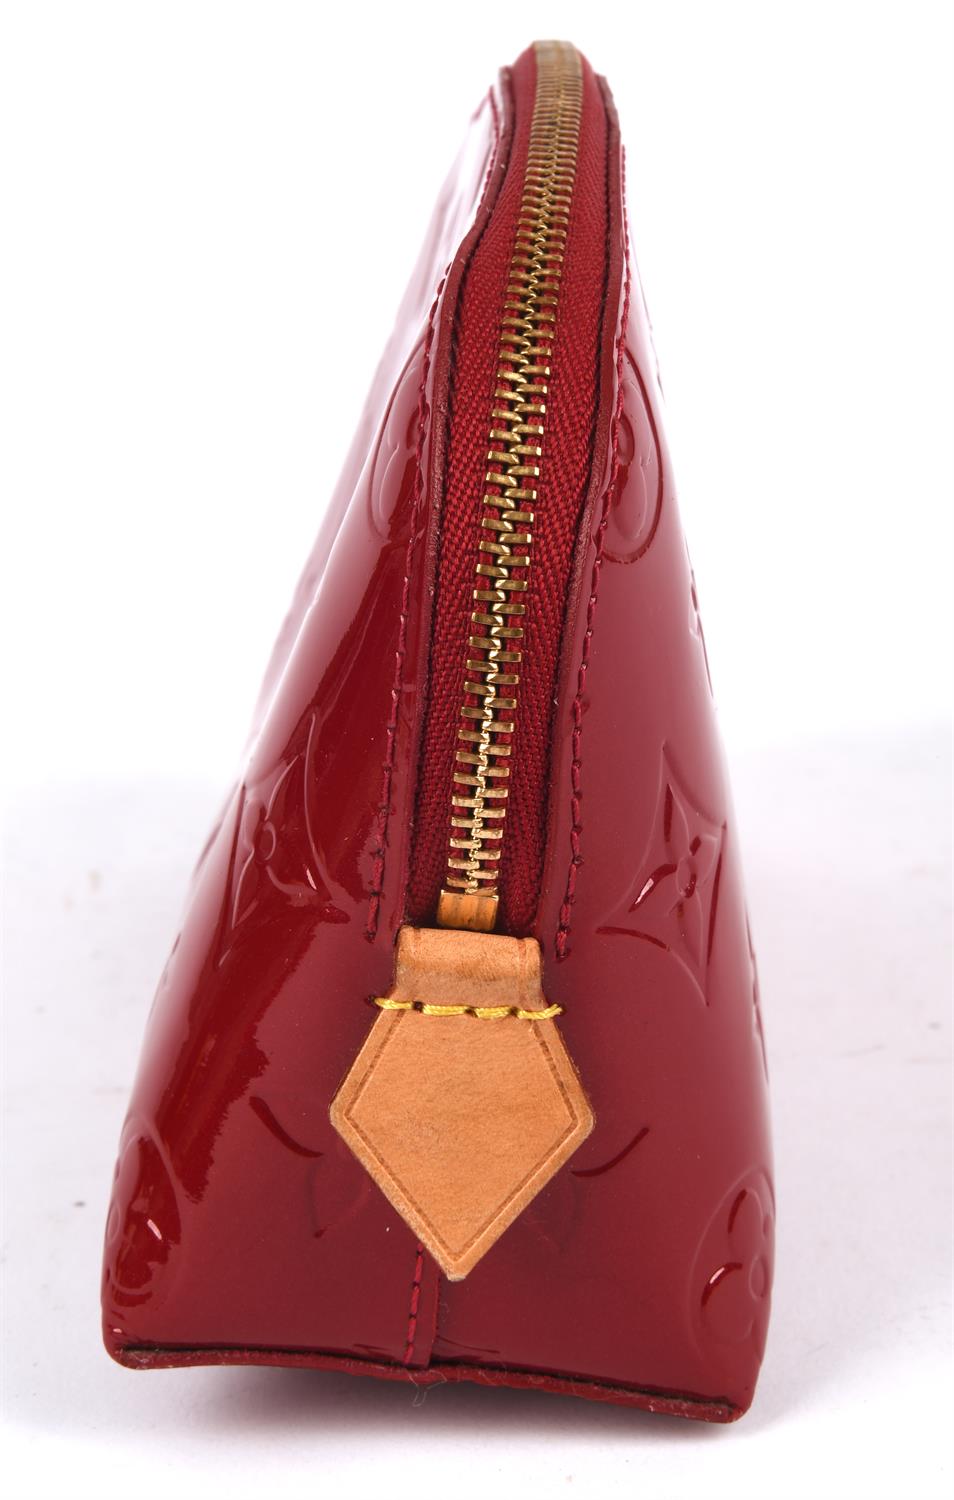 LOUIS VUITTON lipstick red varnished Vernis calf leather make-up bag with dust cloth (17cm x 13cm x - Image 4 of 6